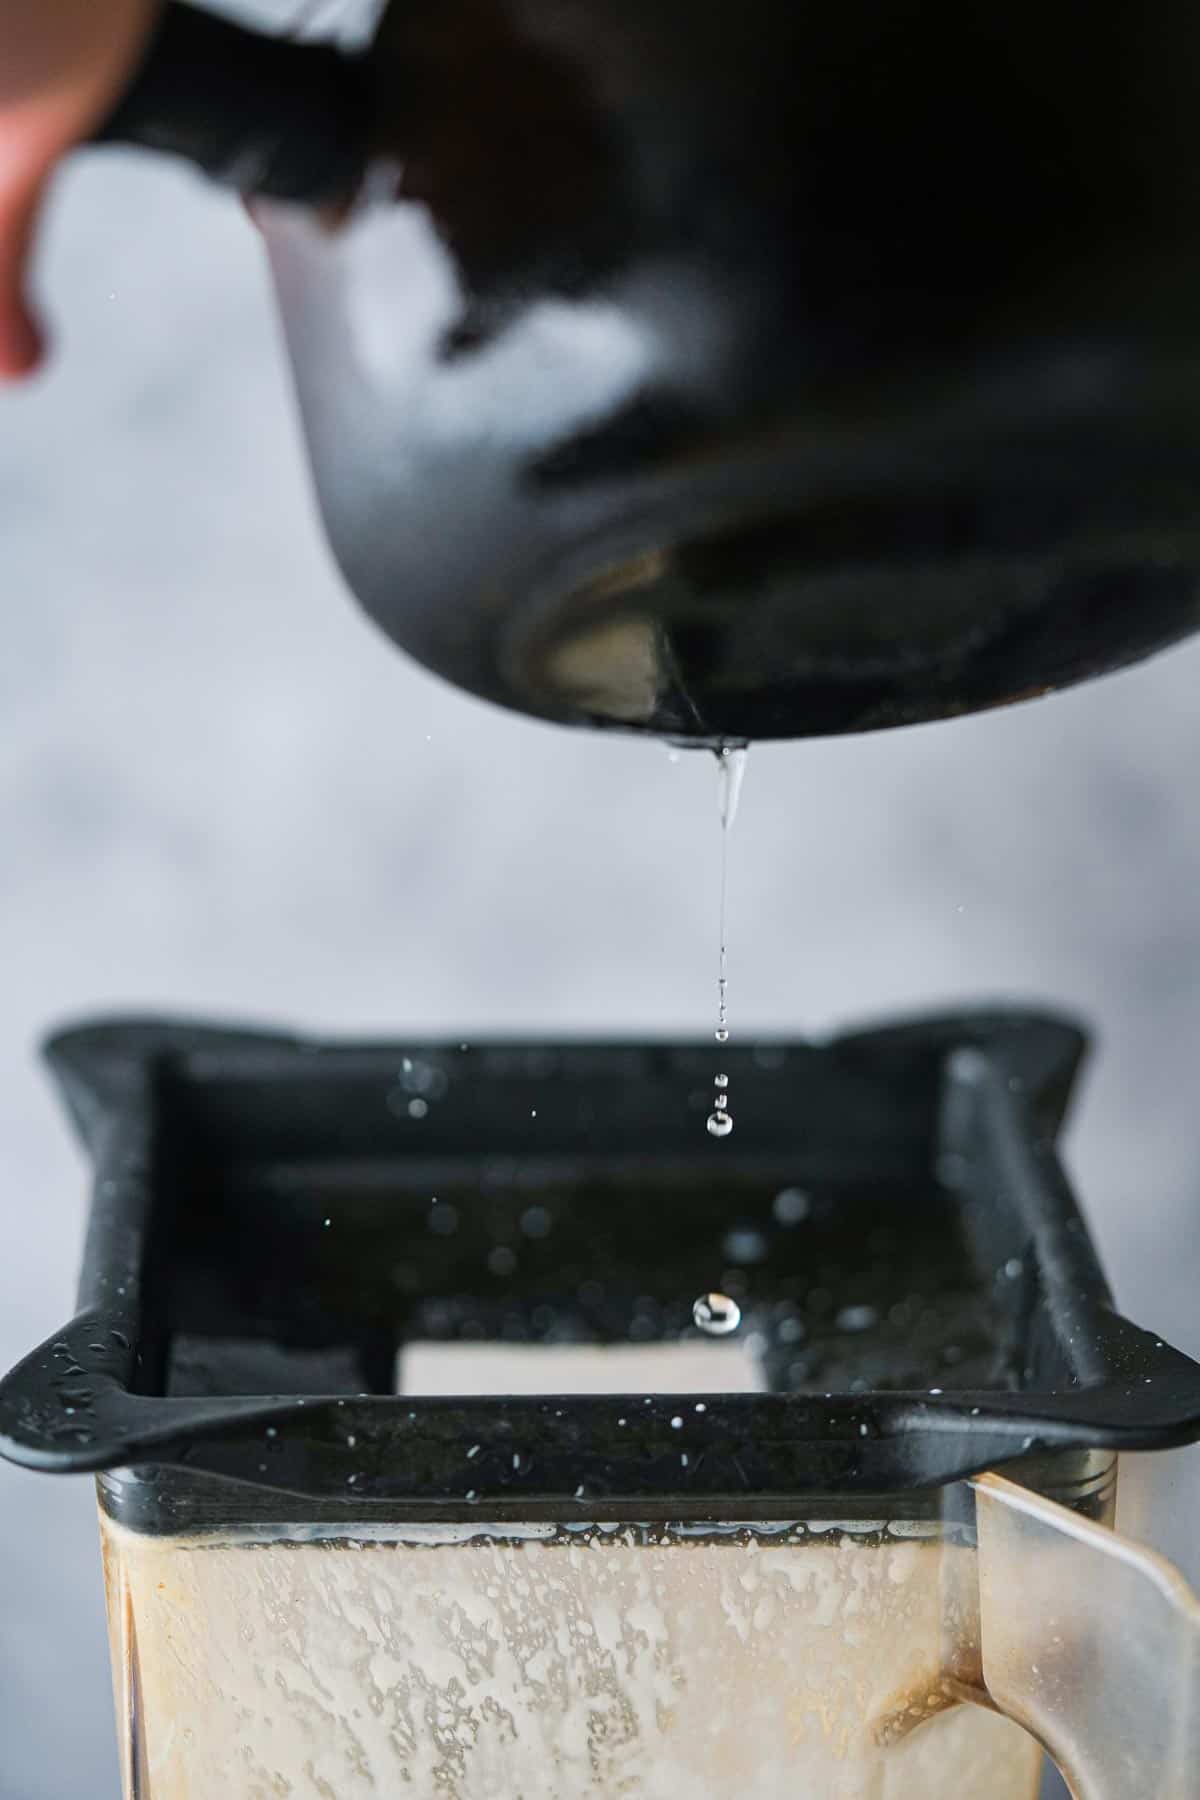 A person drizzling oil into a blender as it runs.